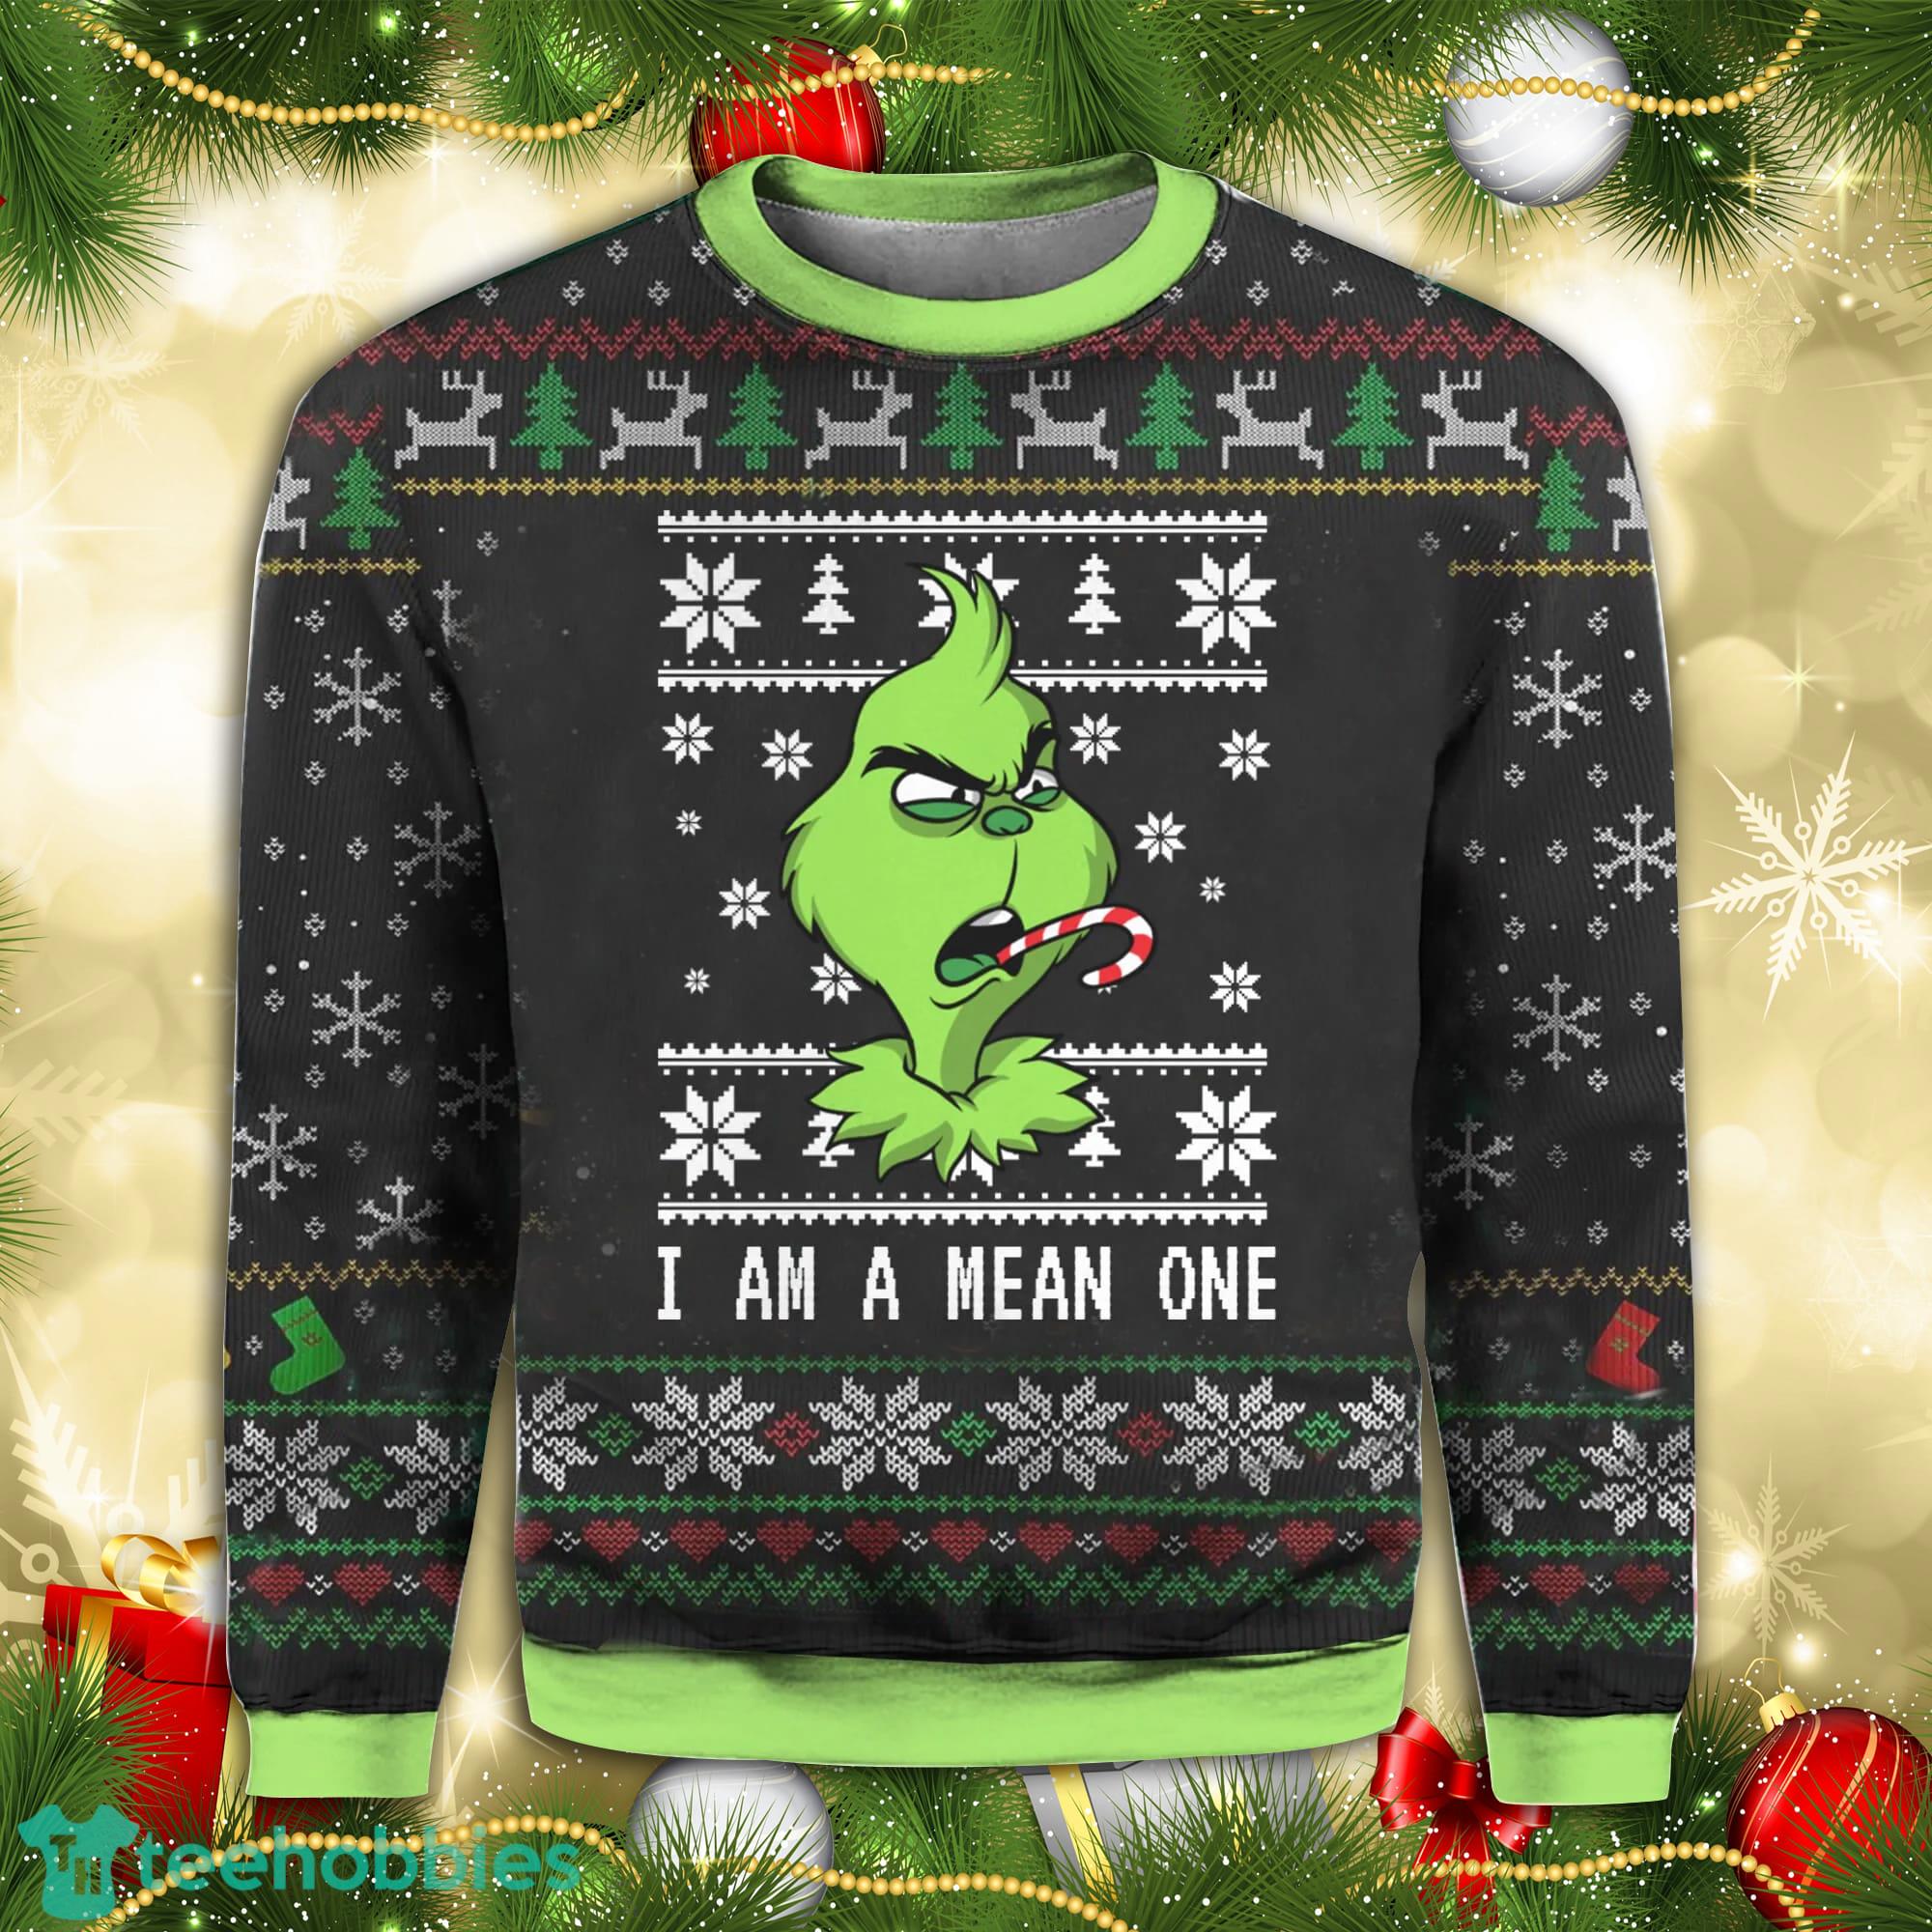 https://image.teehobbies.us/2022/11/funny-grinch-i-am-a-mean-one-merry-christmas-full-print-ugly-sweater.jpg